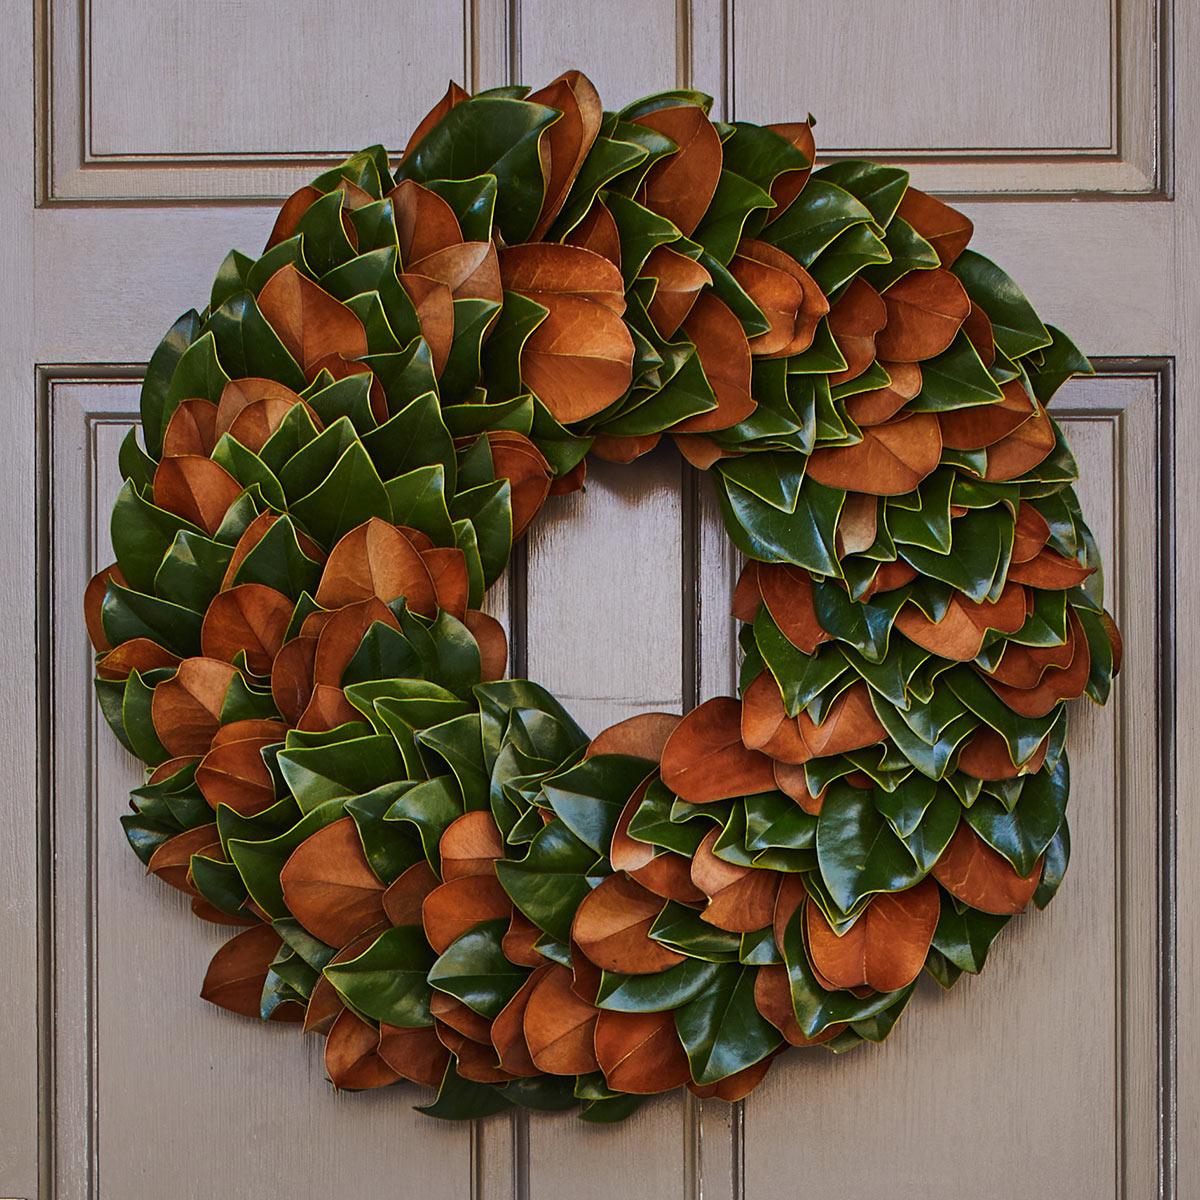 Spring Wreaths Just Hit Hearth & Hand With Magnolia at Target